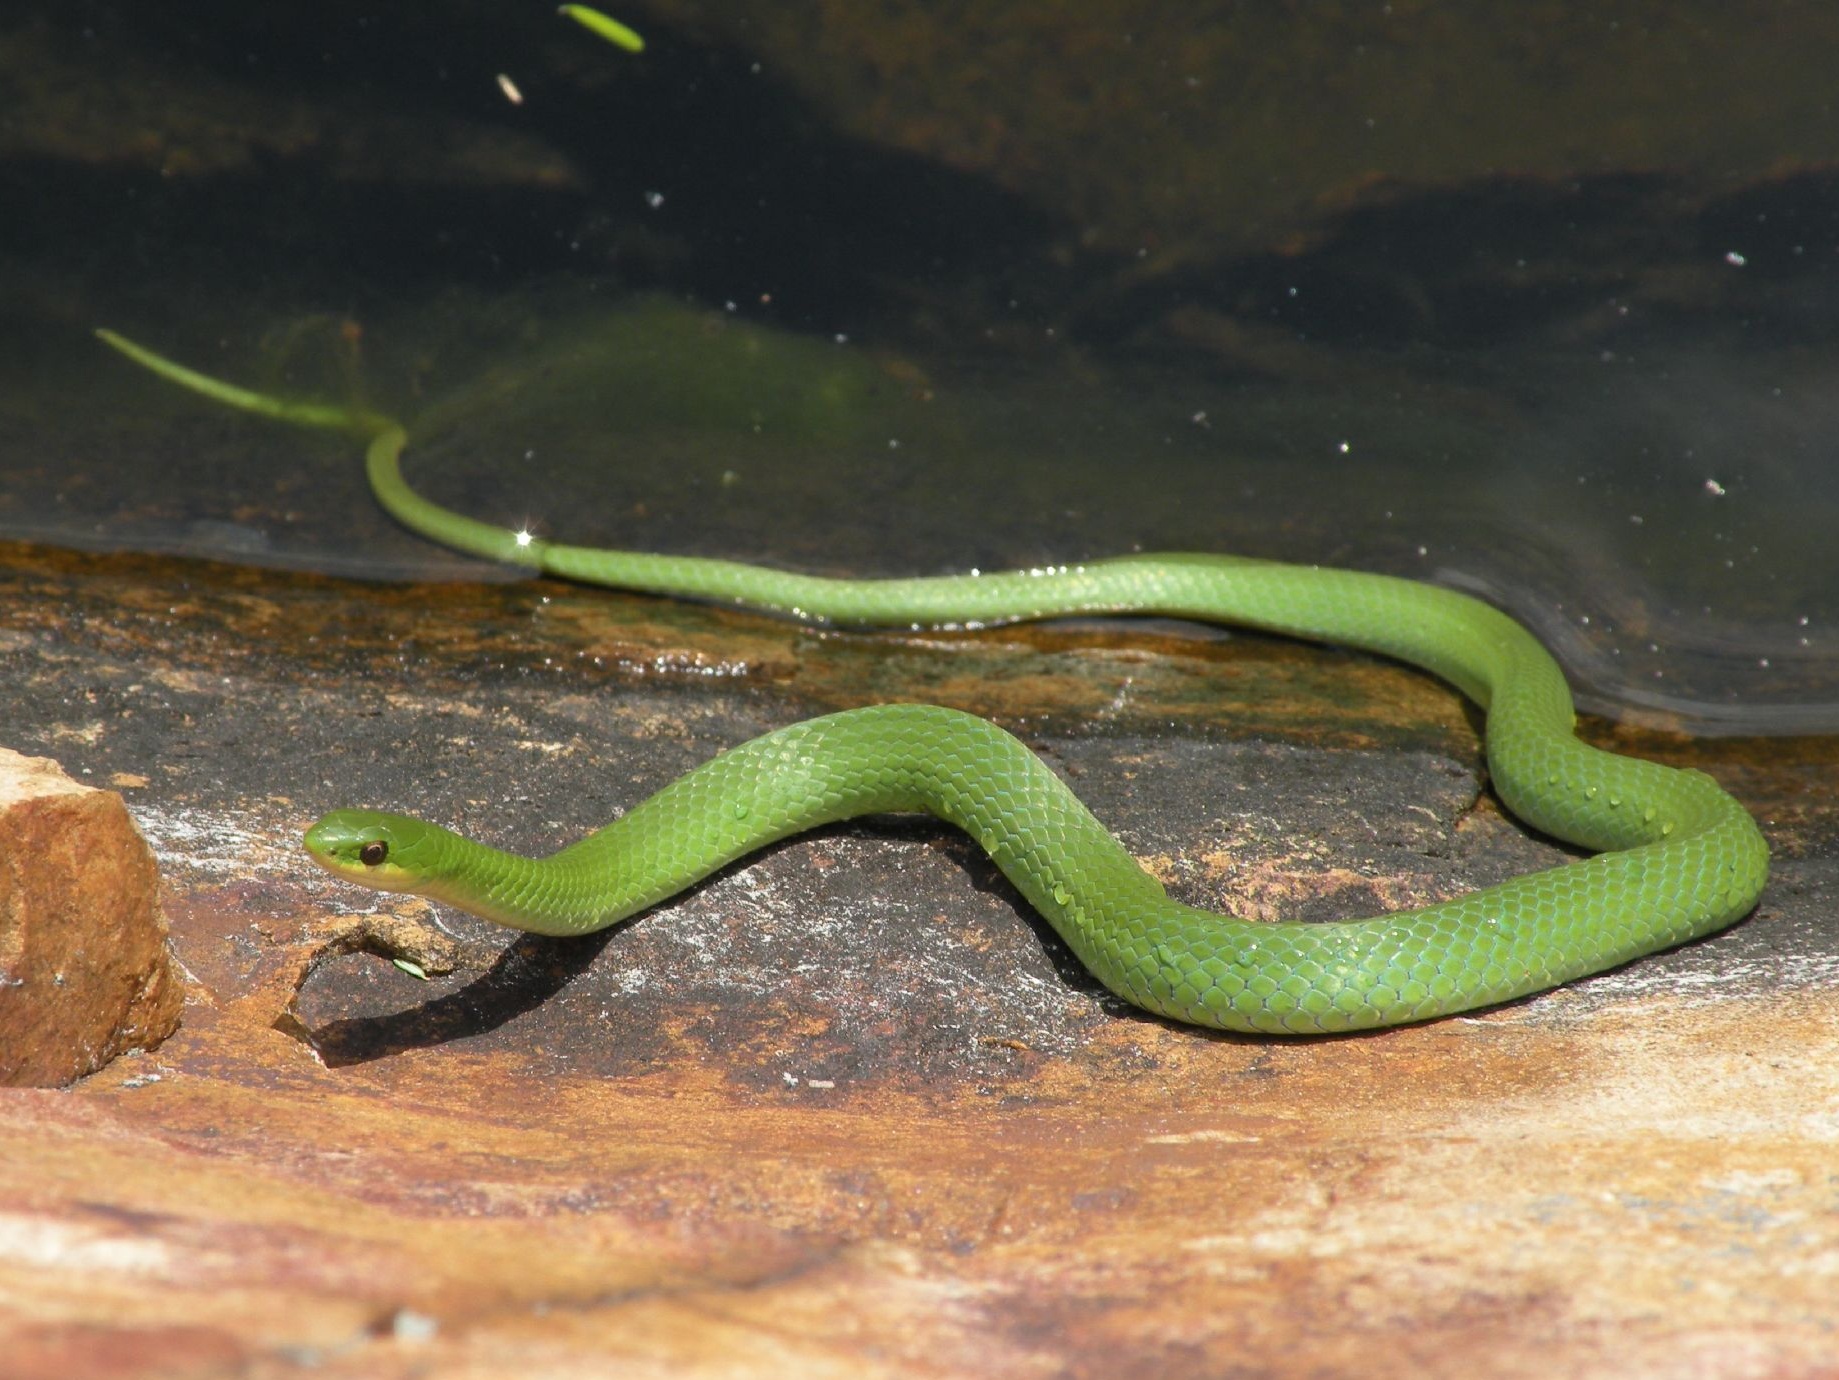 File:Smooth Green Snake.jpg - Wikimedia Commons